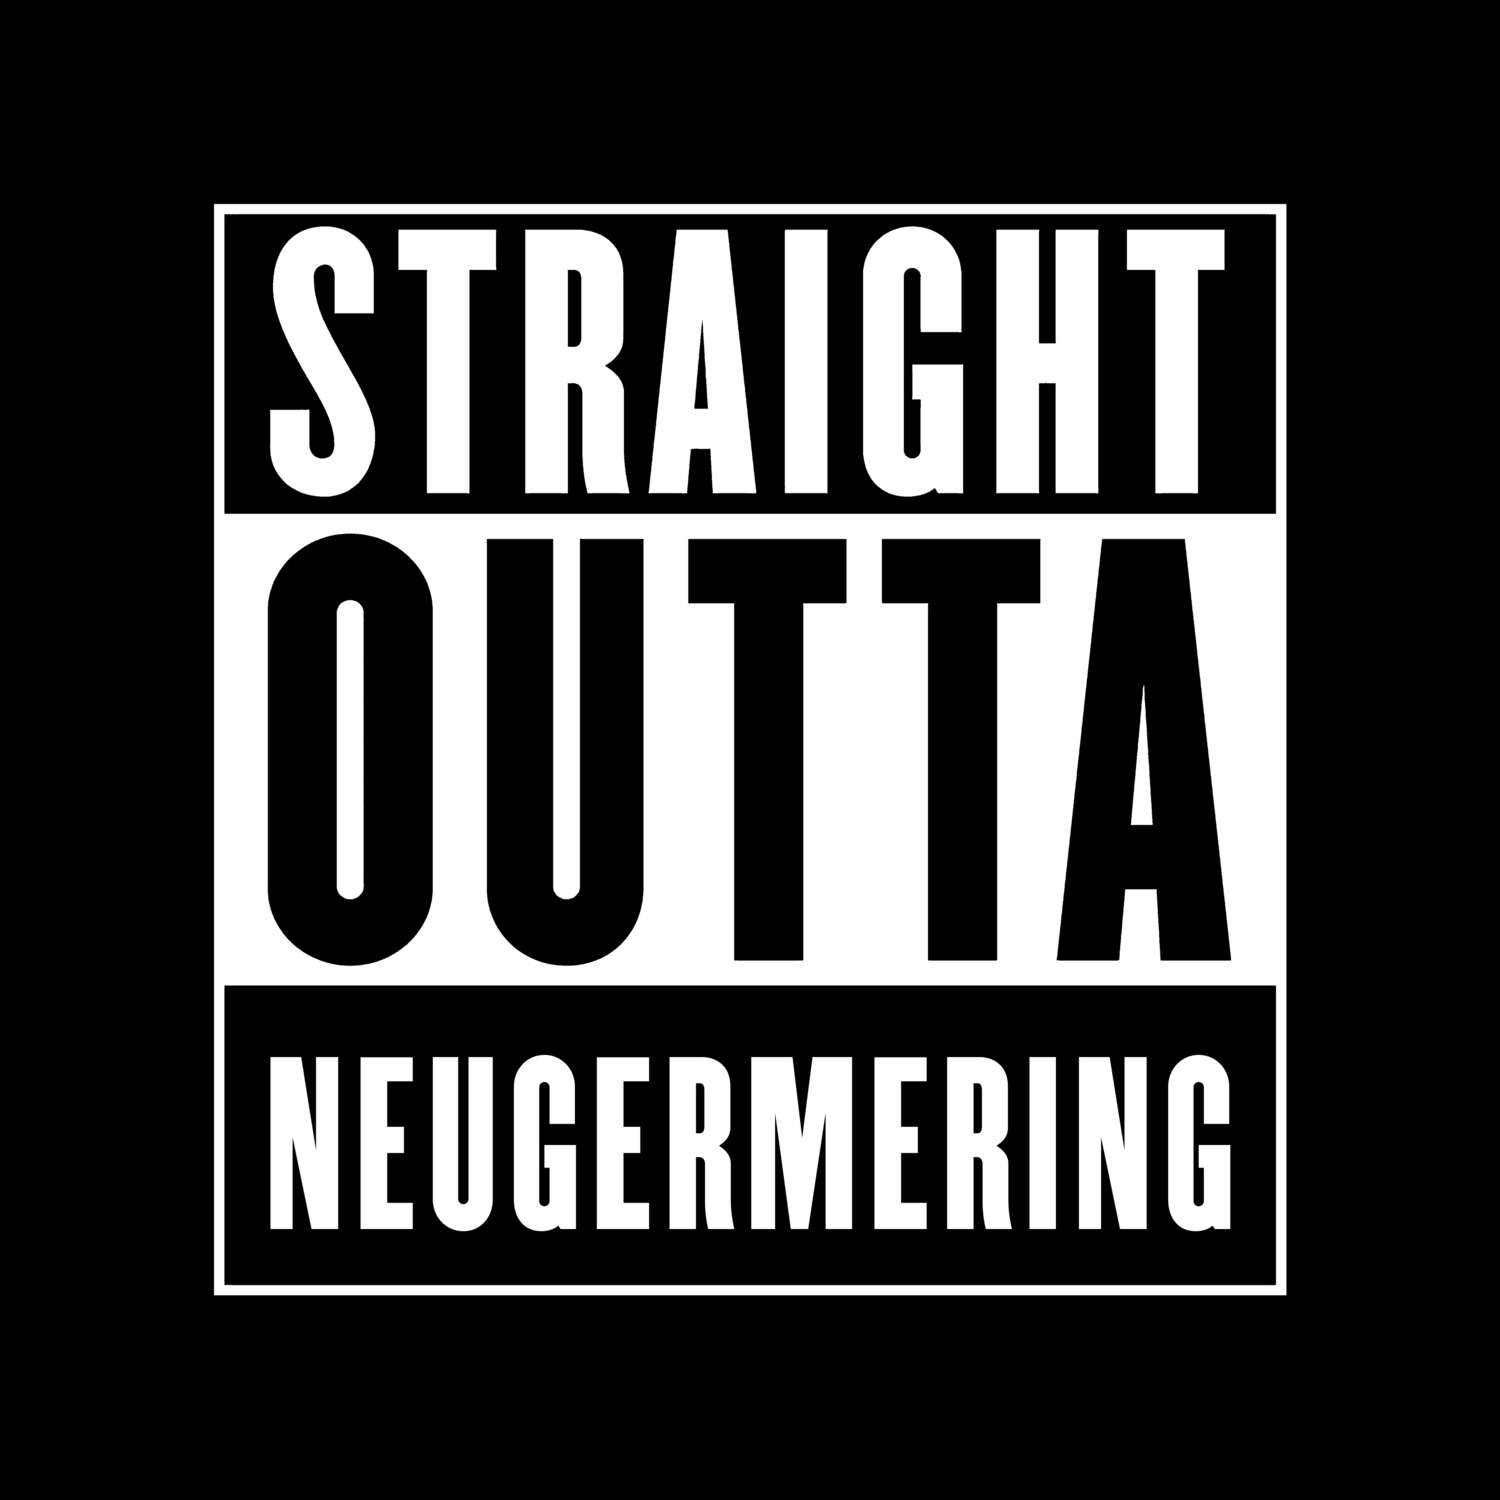 Neugermering T-Shirt »Straight Outta«